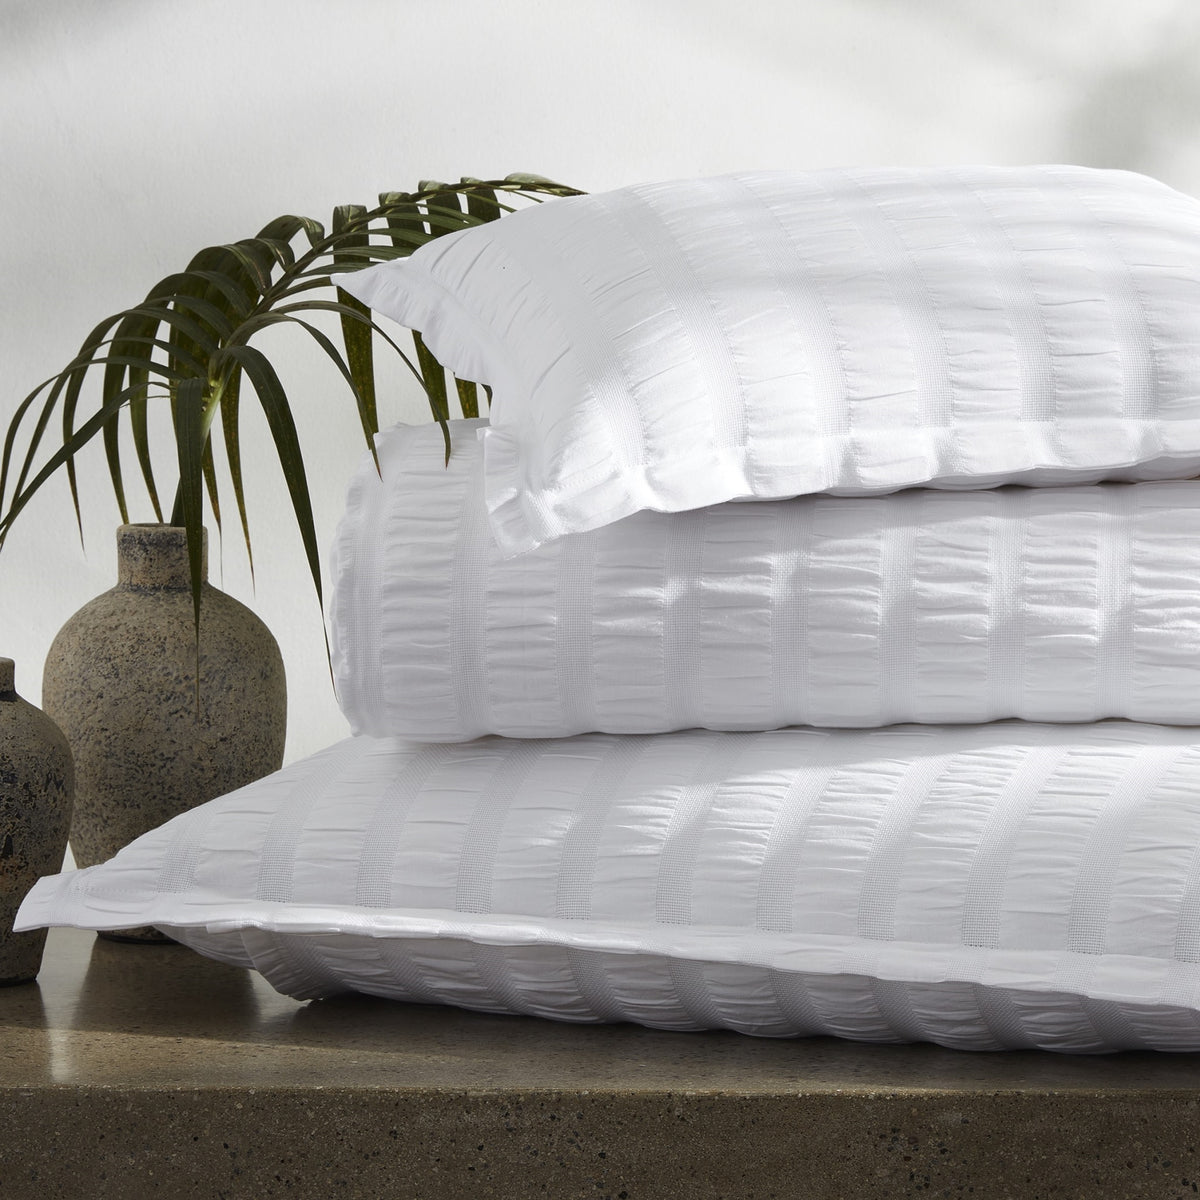 Lifestyle Shot of Stacks of Matouk Panama Bedding in White Color